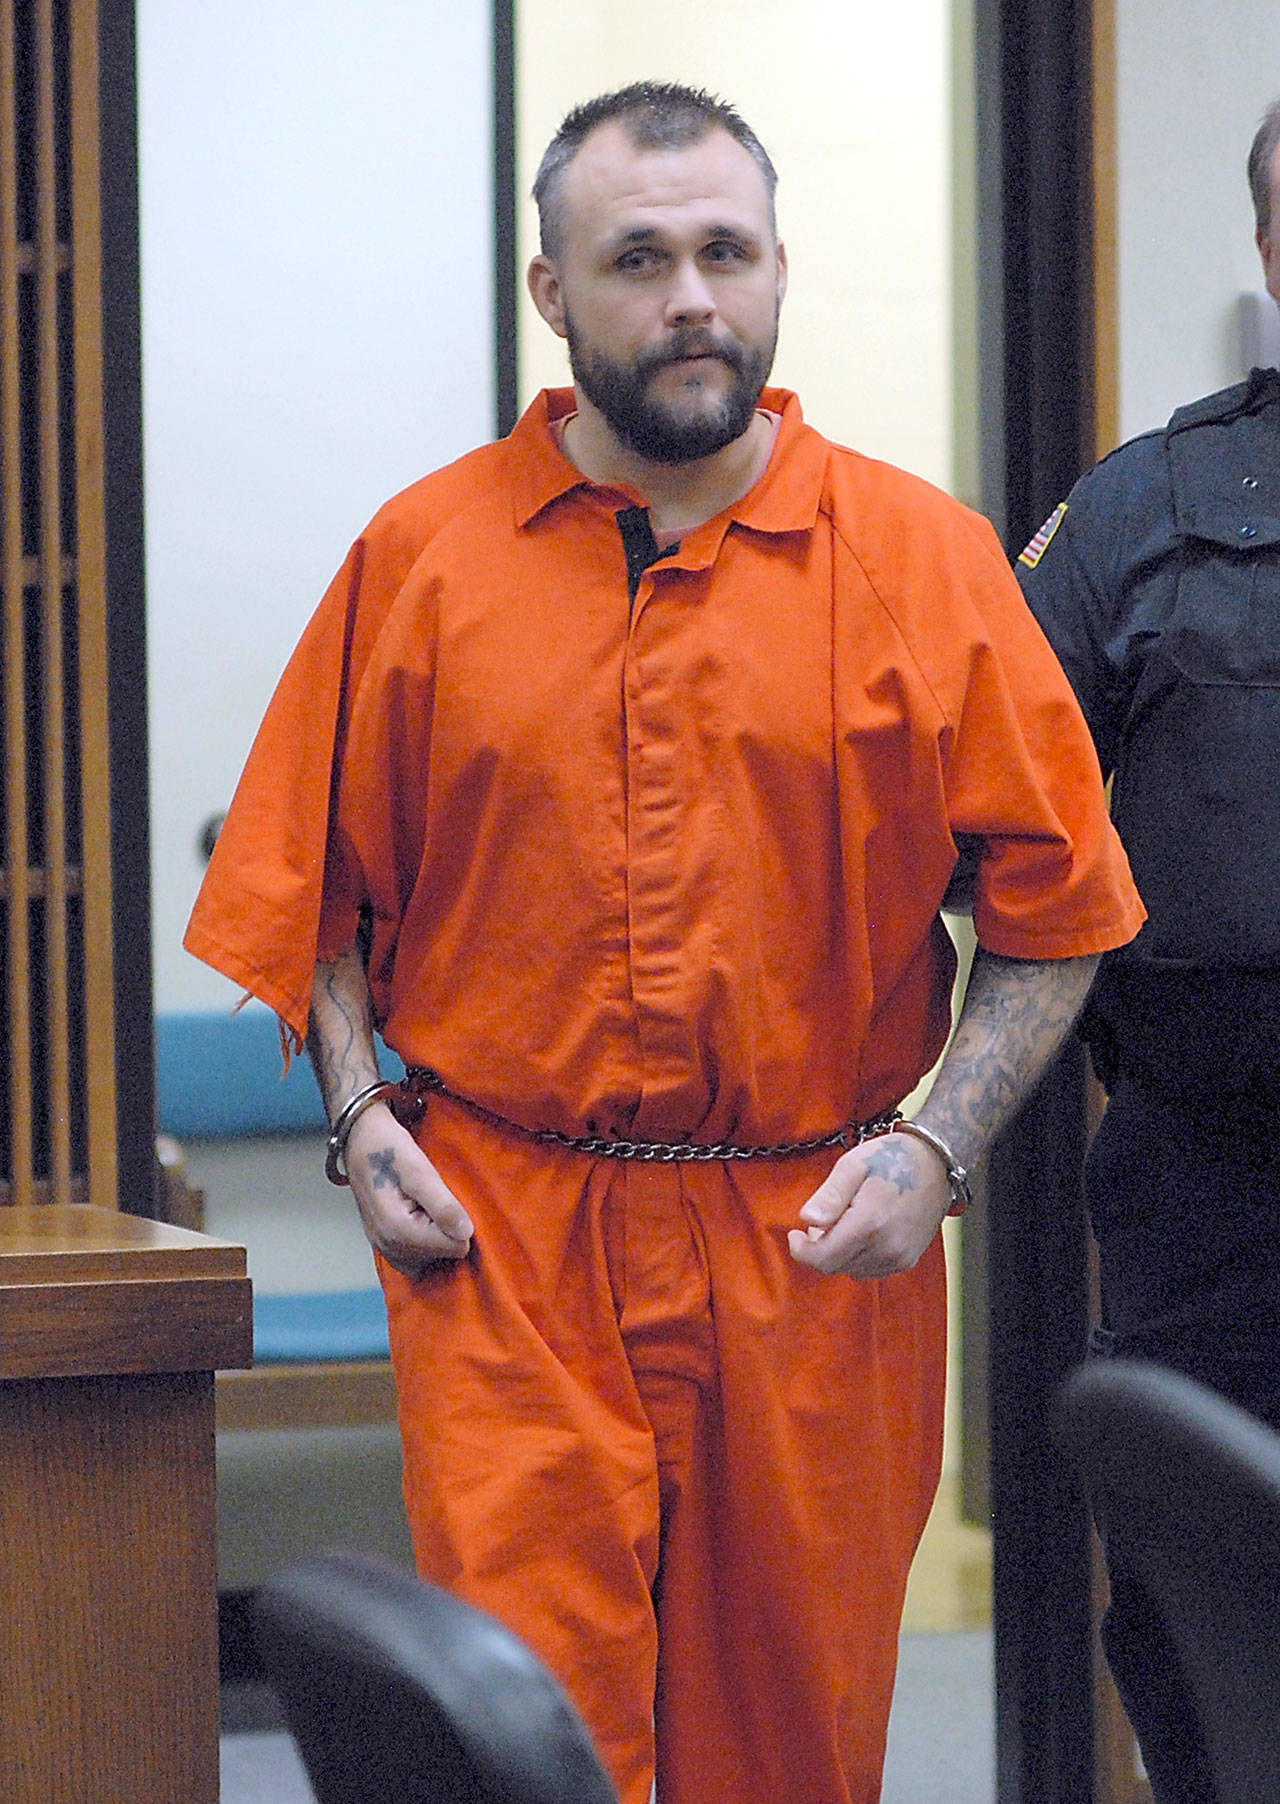 James Sweet enters Clallam County Superior Court on Friday on a variety of charges in connection with an alleged shootout with Port Angeles police and Clallam County sheriff’s deputies on U.S. Highway 101 on May 28, 2016. (Keith Thorpe/Peninsula Daily News)